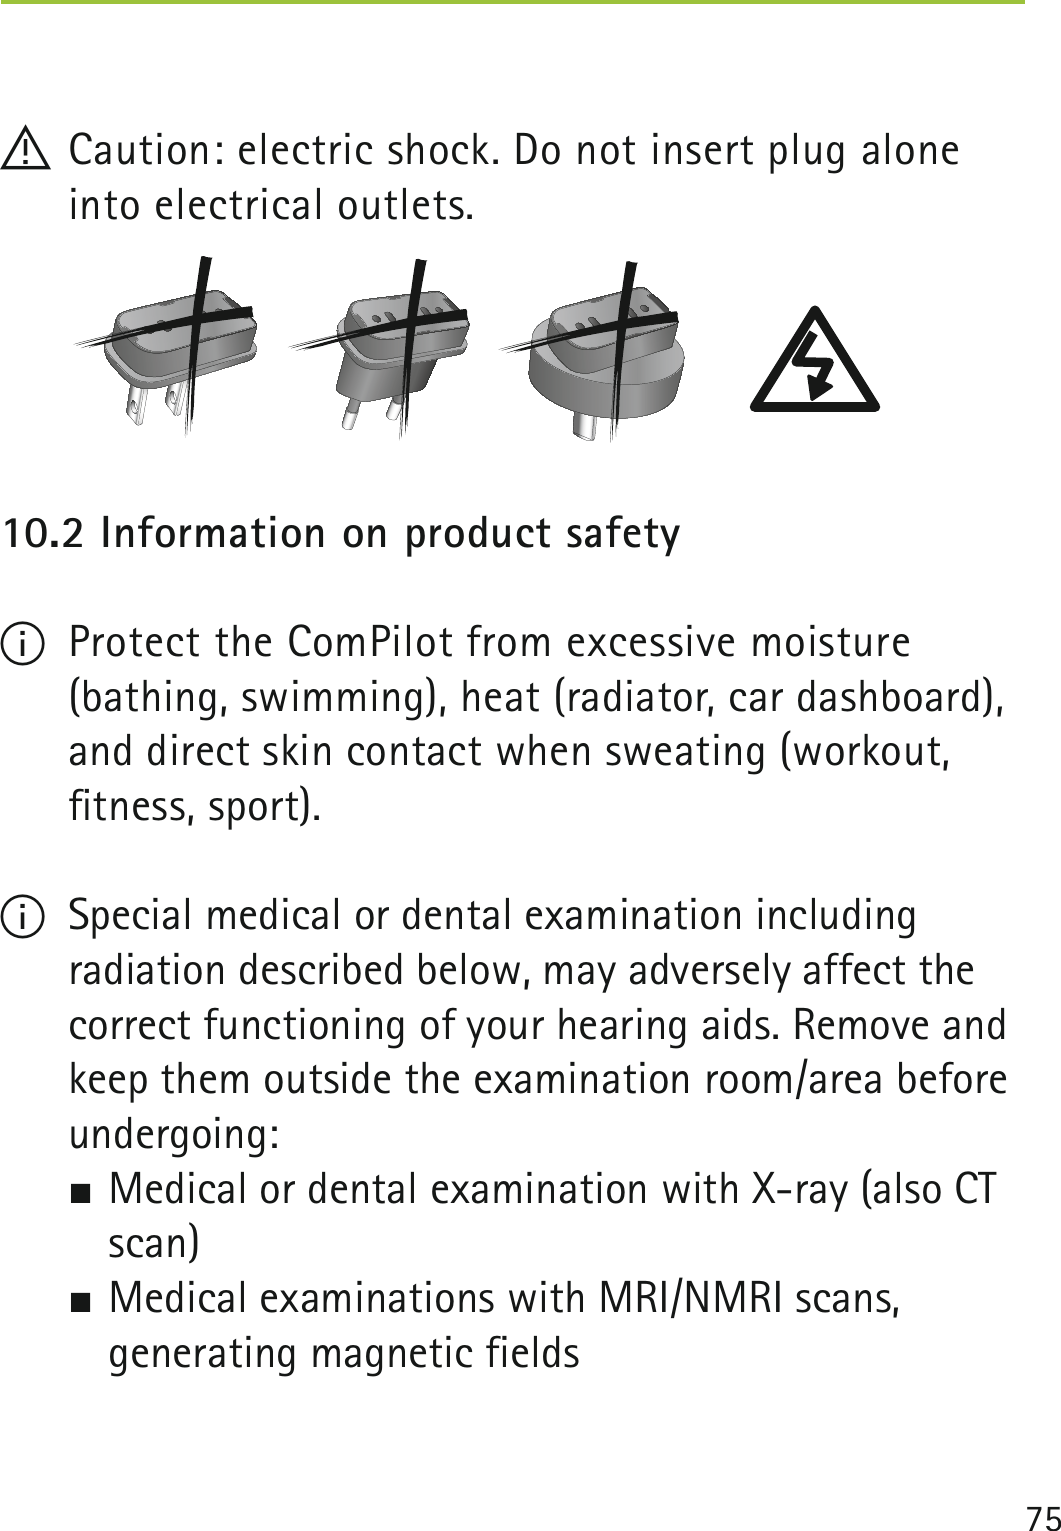 75 ! Caution: electric shock. Do not insert plug alone into electrical outlets.10.2 Information on product safety I  Protect the ComPilot from excessive moisture  (bathing, swimming), heat (radiator, car dashboard), and direct skin contact when sweating (workout,  ﬁtness, sport). ISpecial medical or dental examination including radiation described below, may adversely affect the correct functioning of your hearing aids. Remove and keep them outside the examination room/area before undergoing: SMedical or dental examination with X-ray (also CT scan) SMedical examinations with MRI/NMRI scans, generating magnetic fields